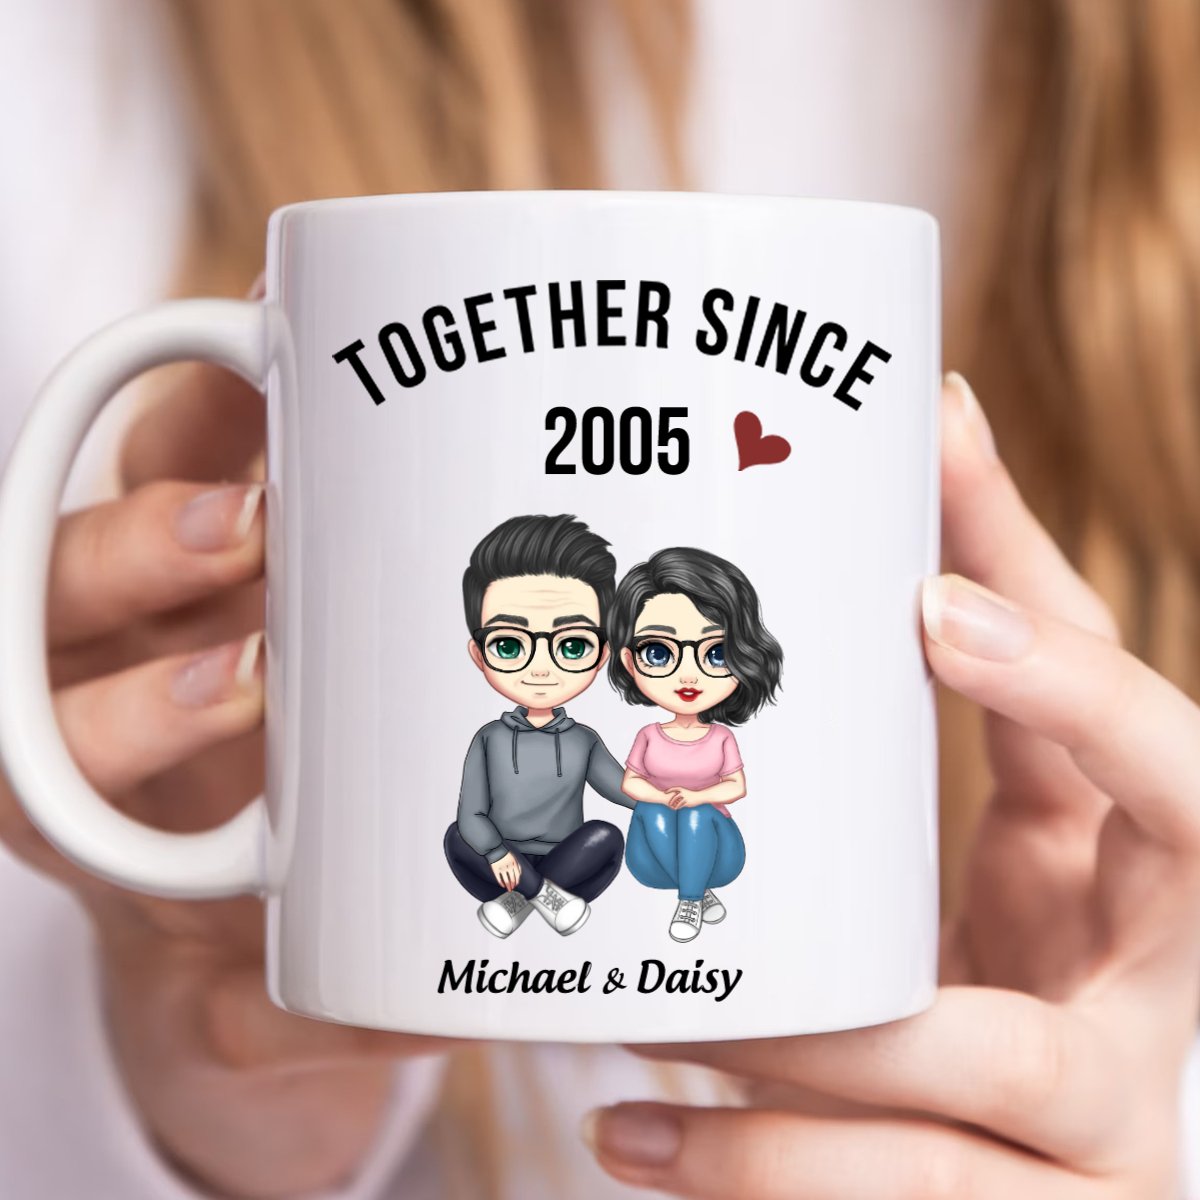 Together Since - Personalized Mug - Anniversary, Valentine's Day Gift For Spouse, Husband, Wife, Lovers, Girlfriend, Boyfriend - The Next Custom Gift